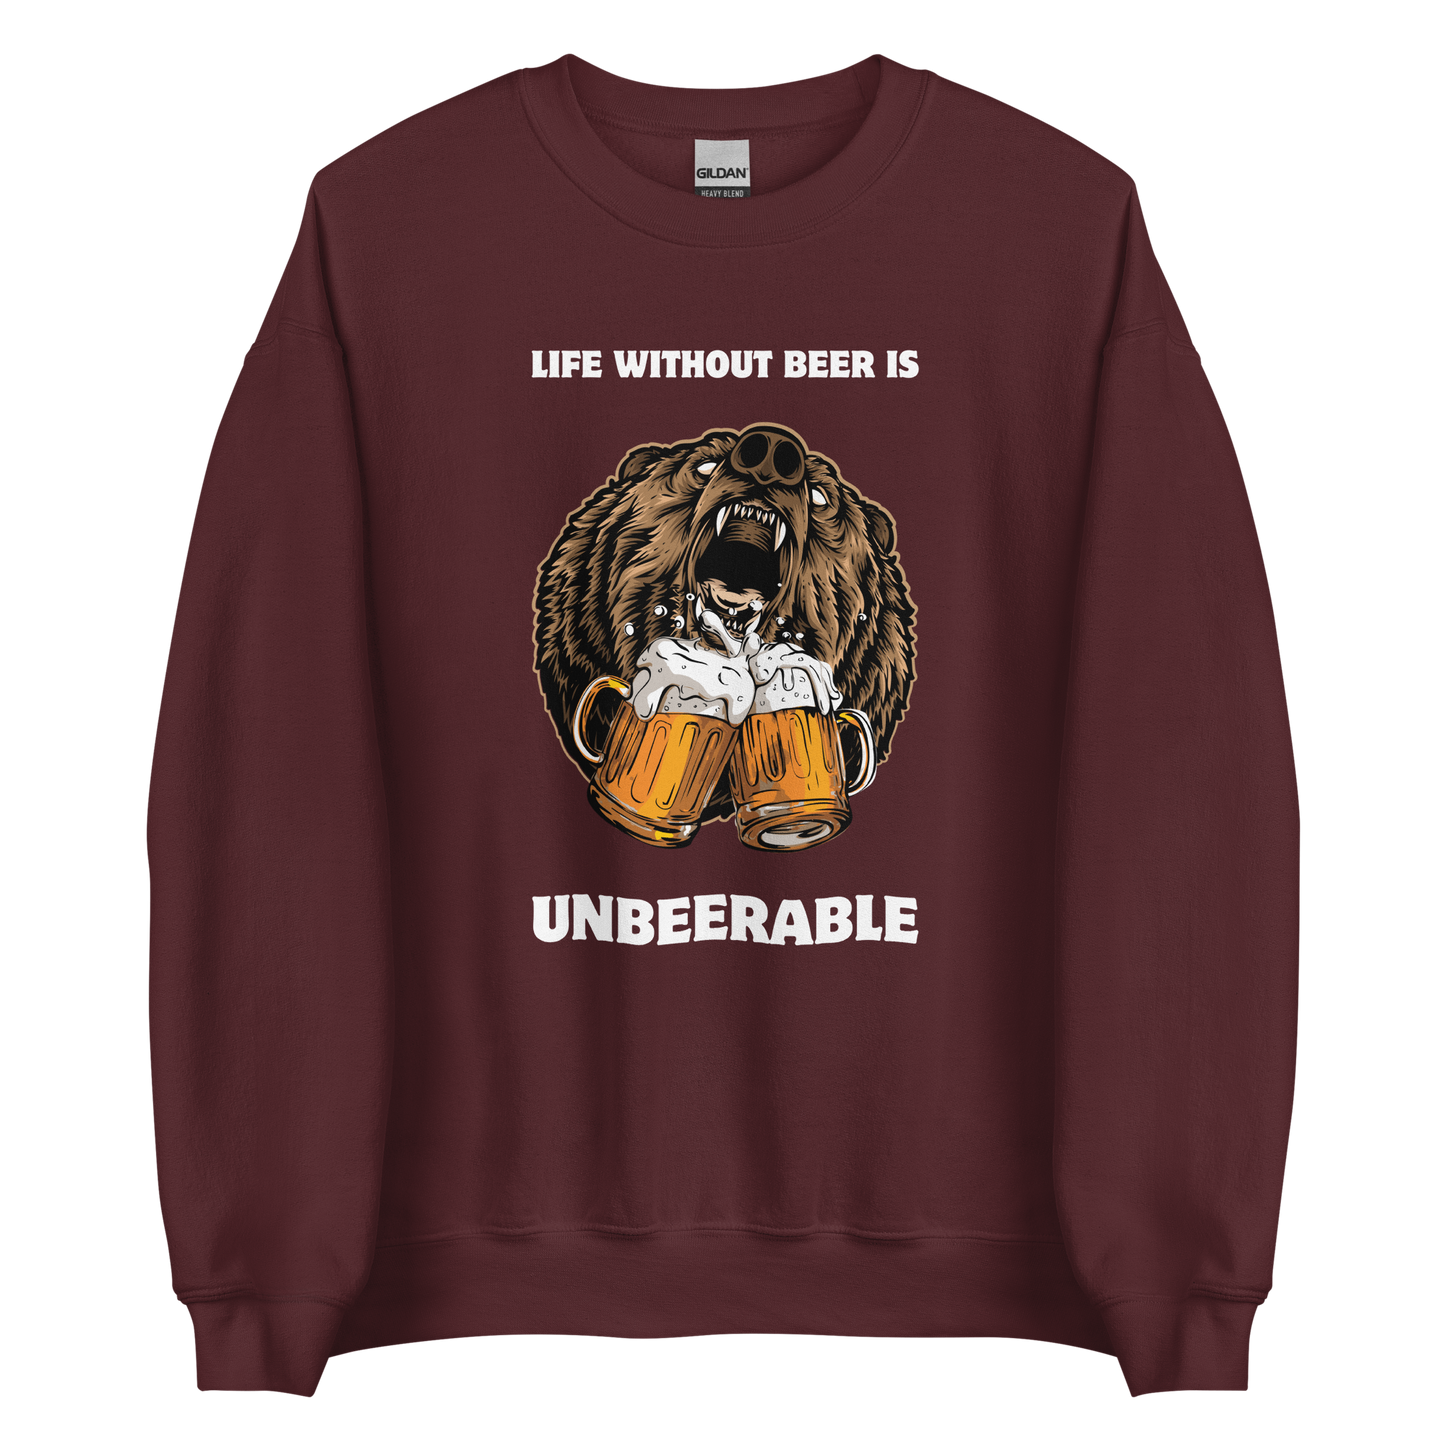 Maroon Bear Sweatshirt featuring a Life Without Beer Is Unbeerable graphic on the chest - Funny Graphic Bear Sweatshirts - Boozy Fox